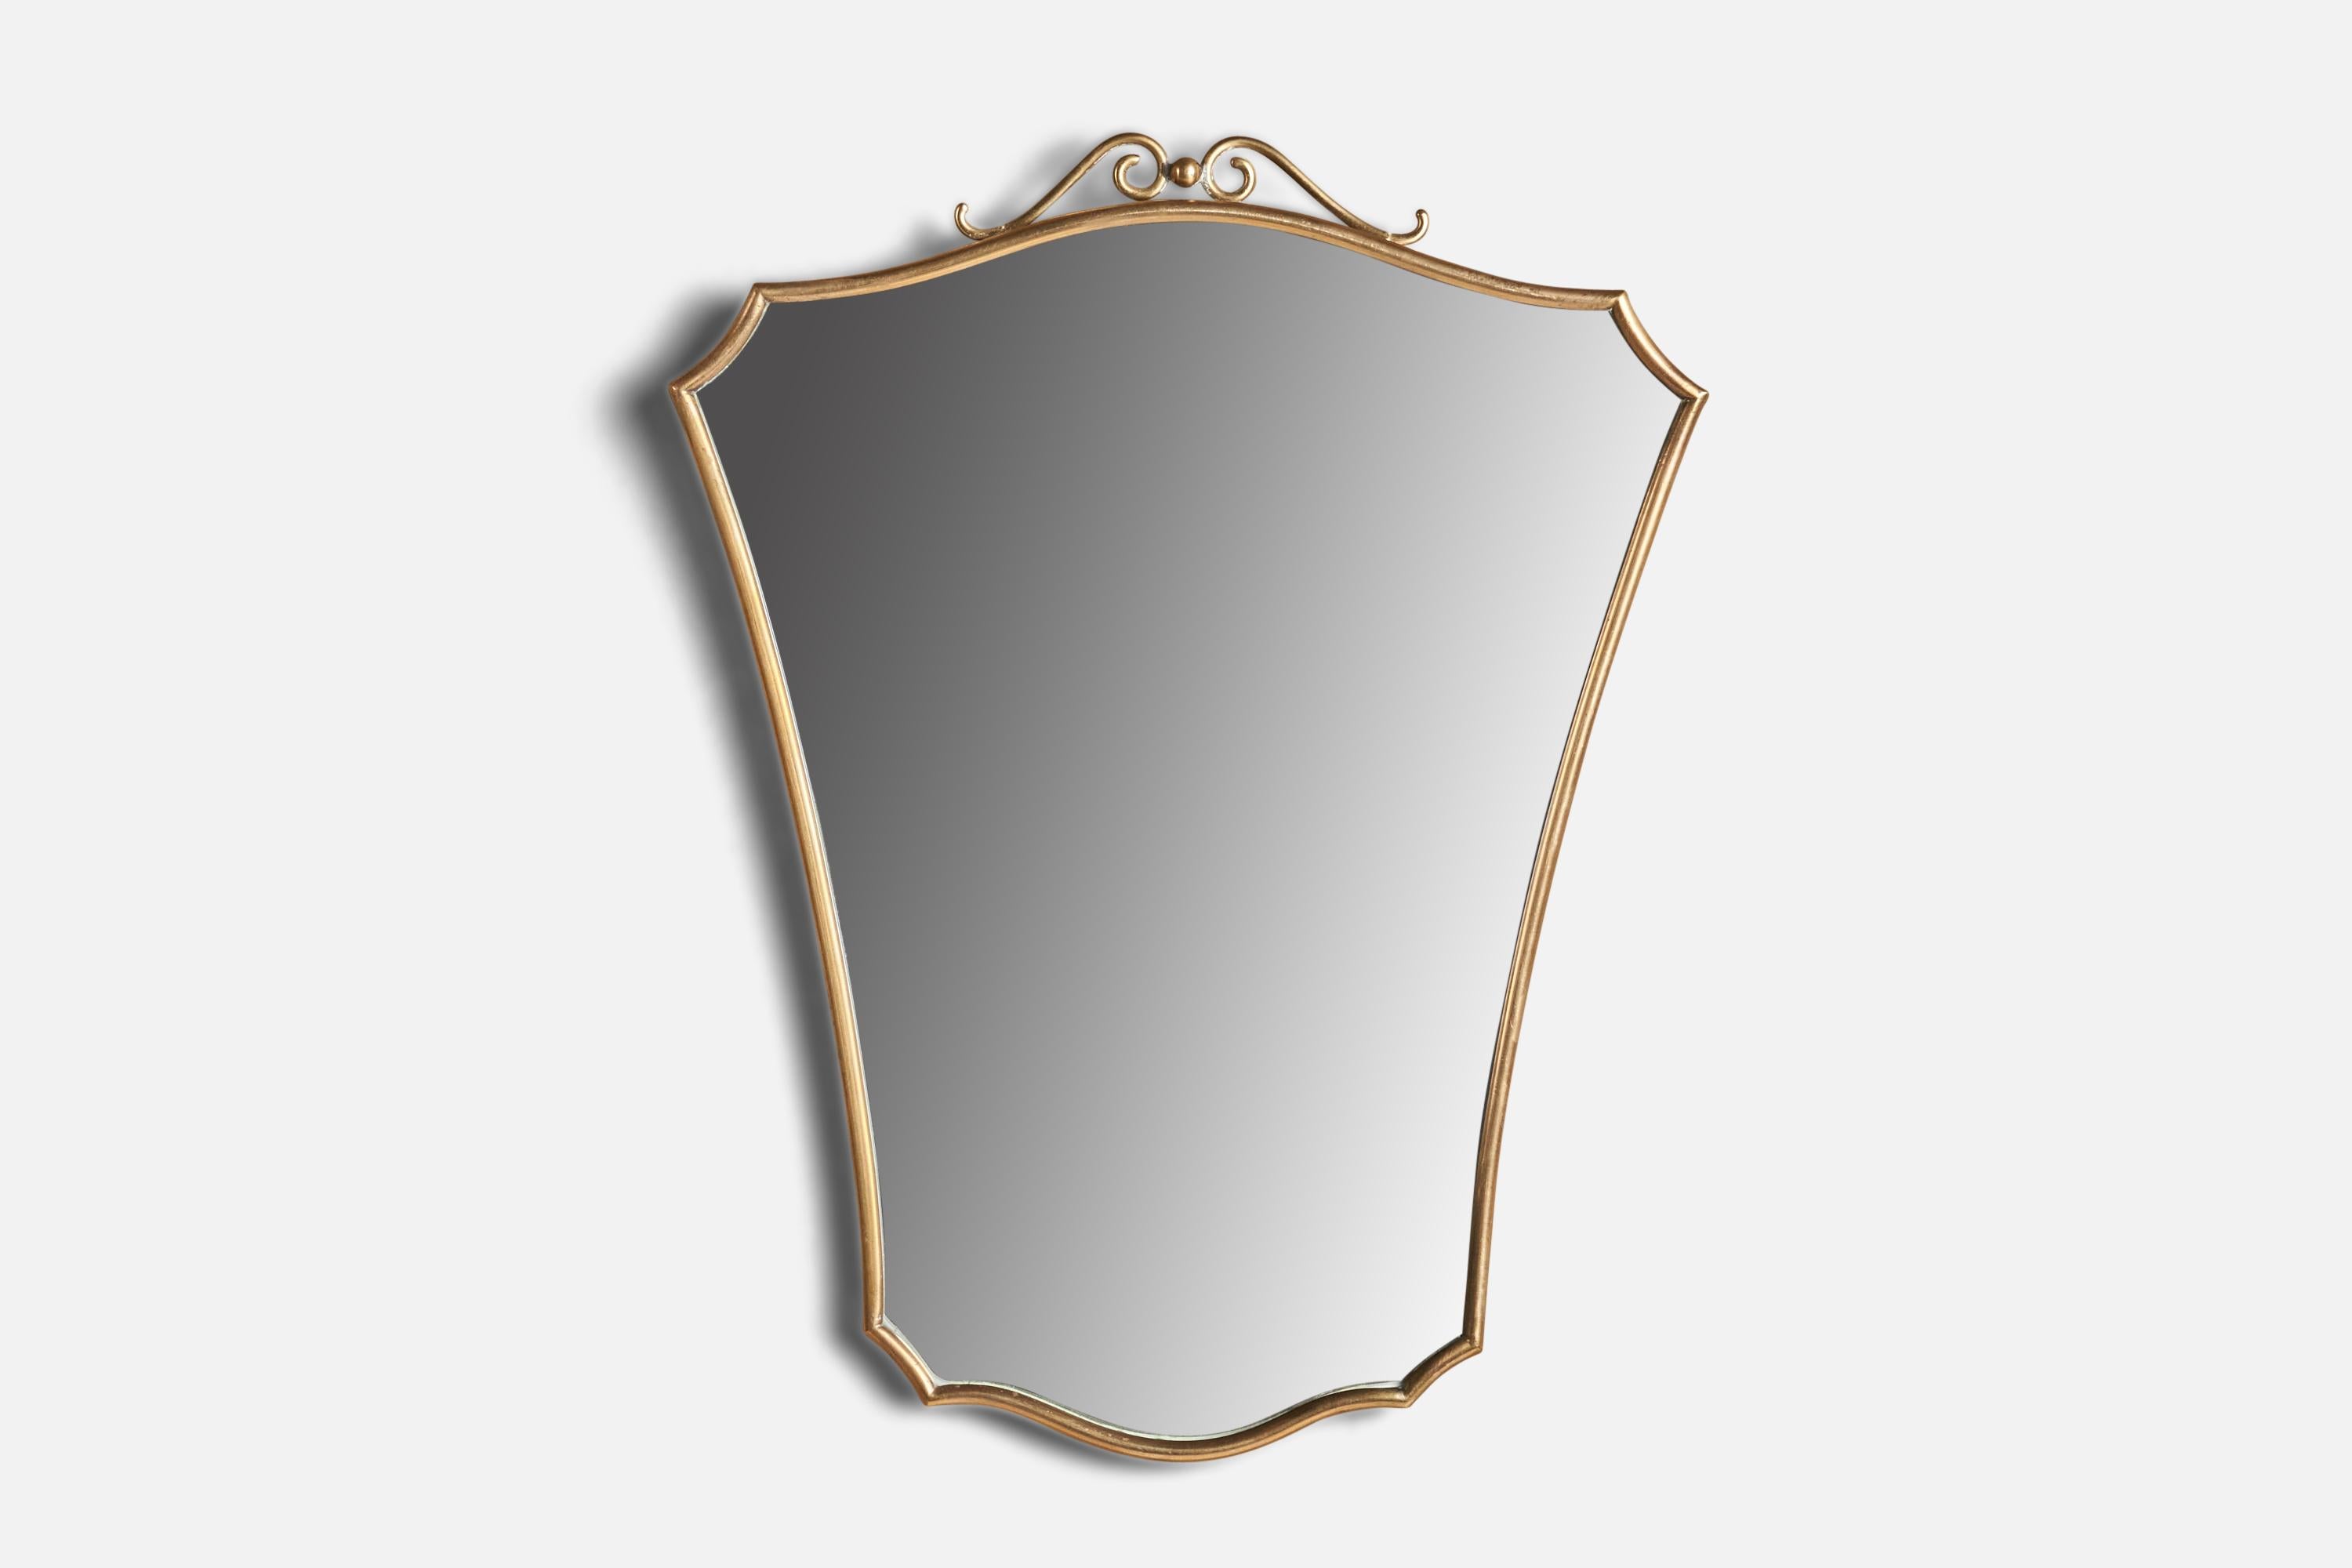 A brass wall mirror designed and produced in Italy, c. 1940s.